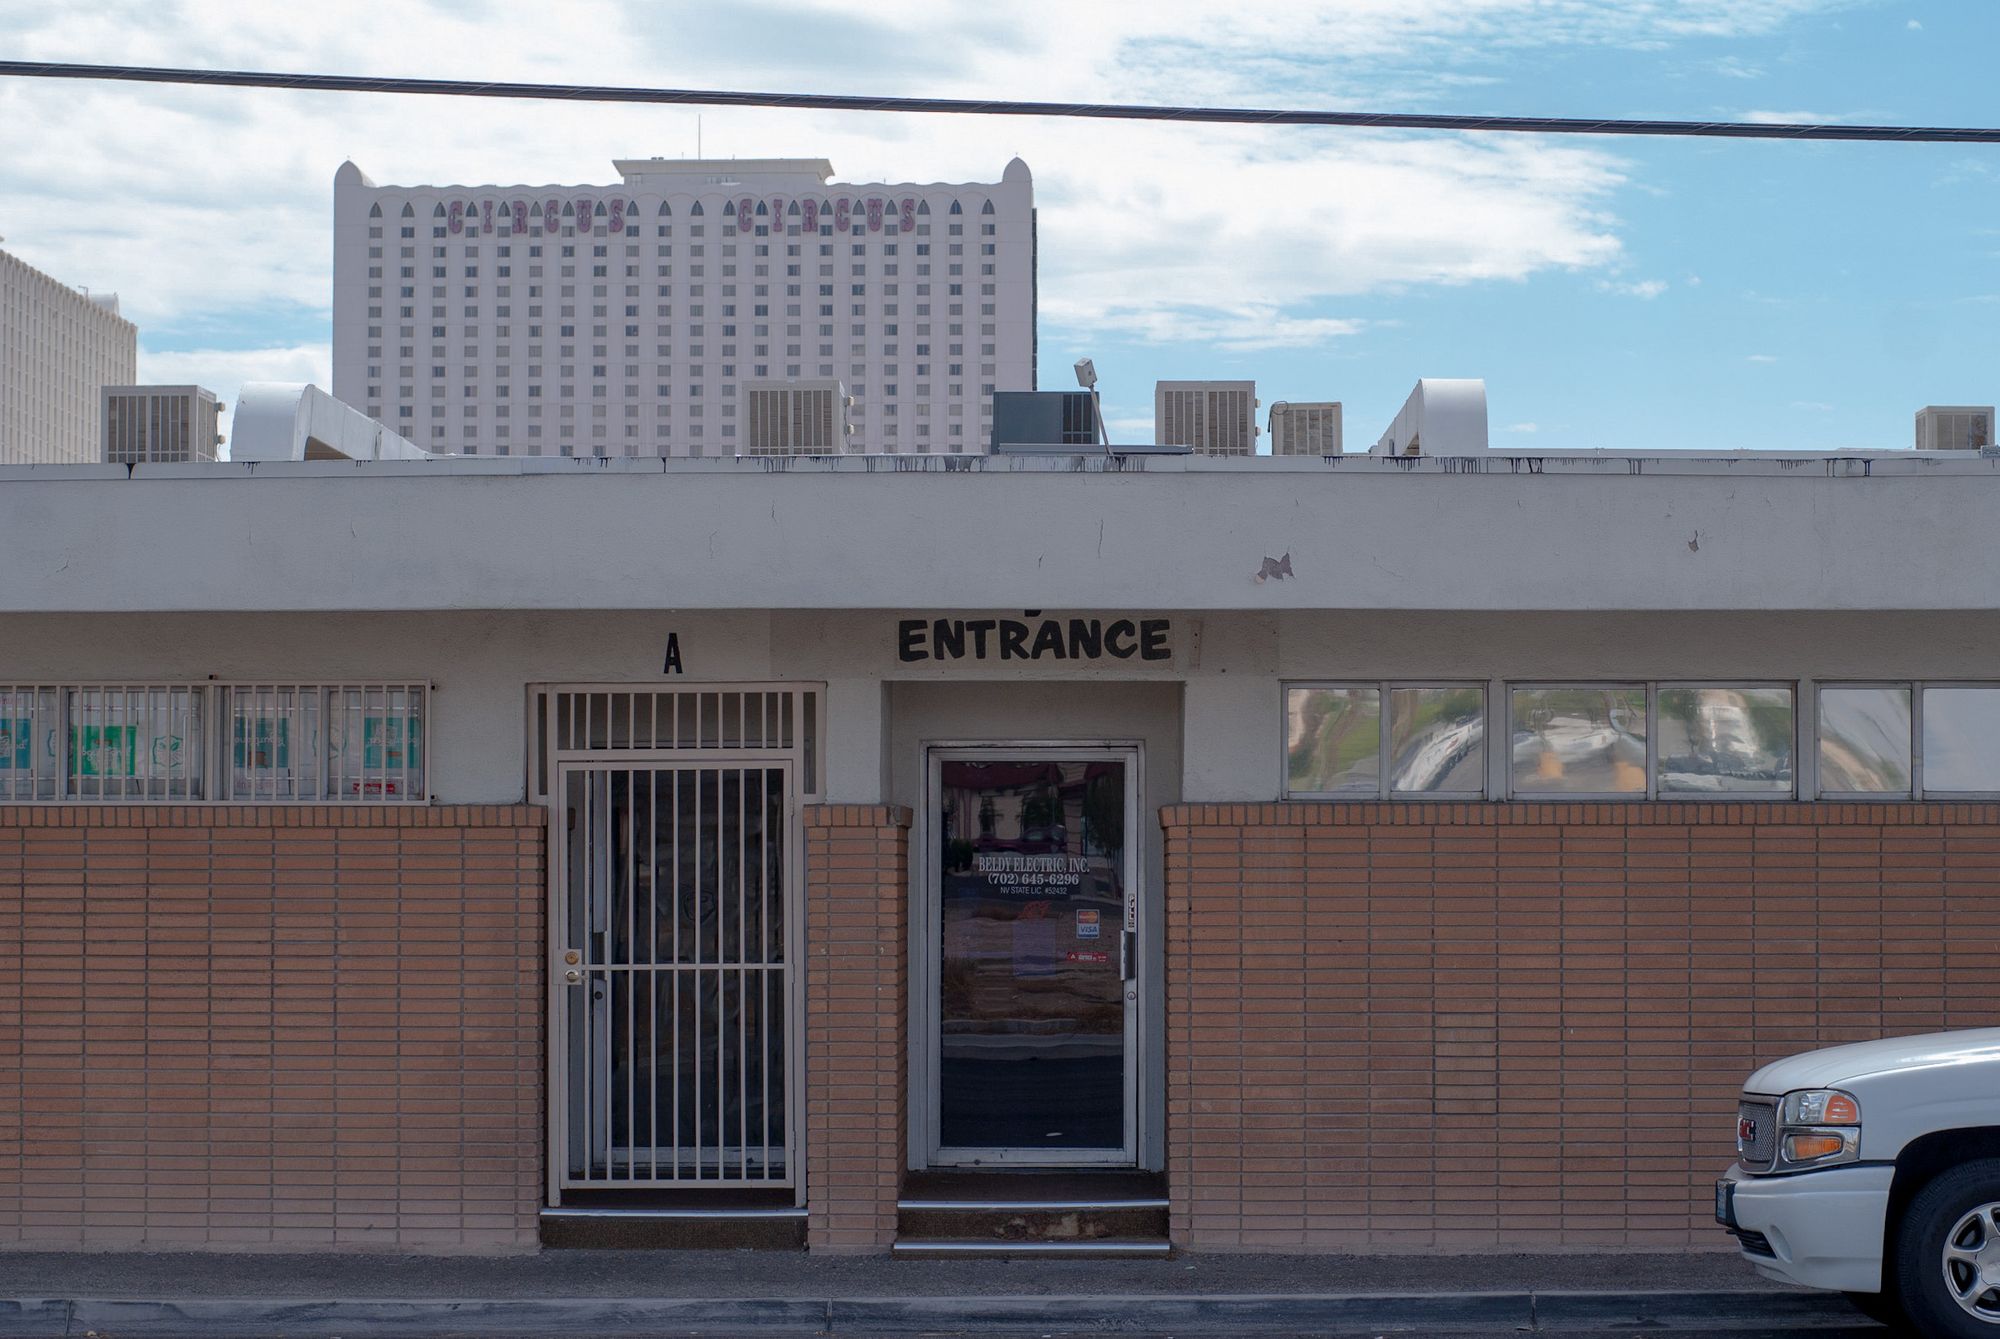 Looking Back at the Vegas Vernacular Project